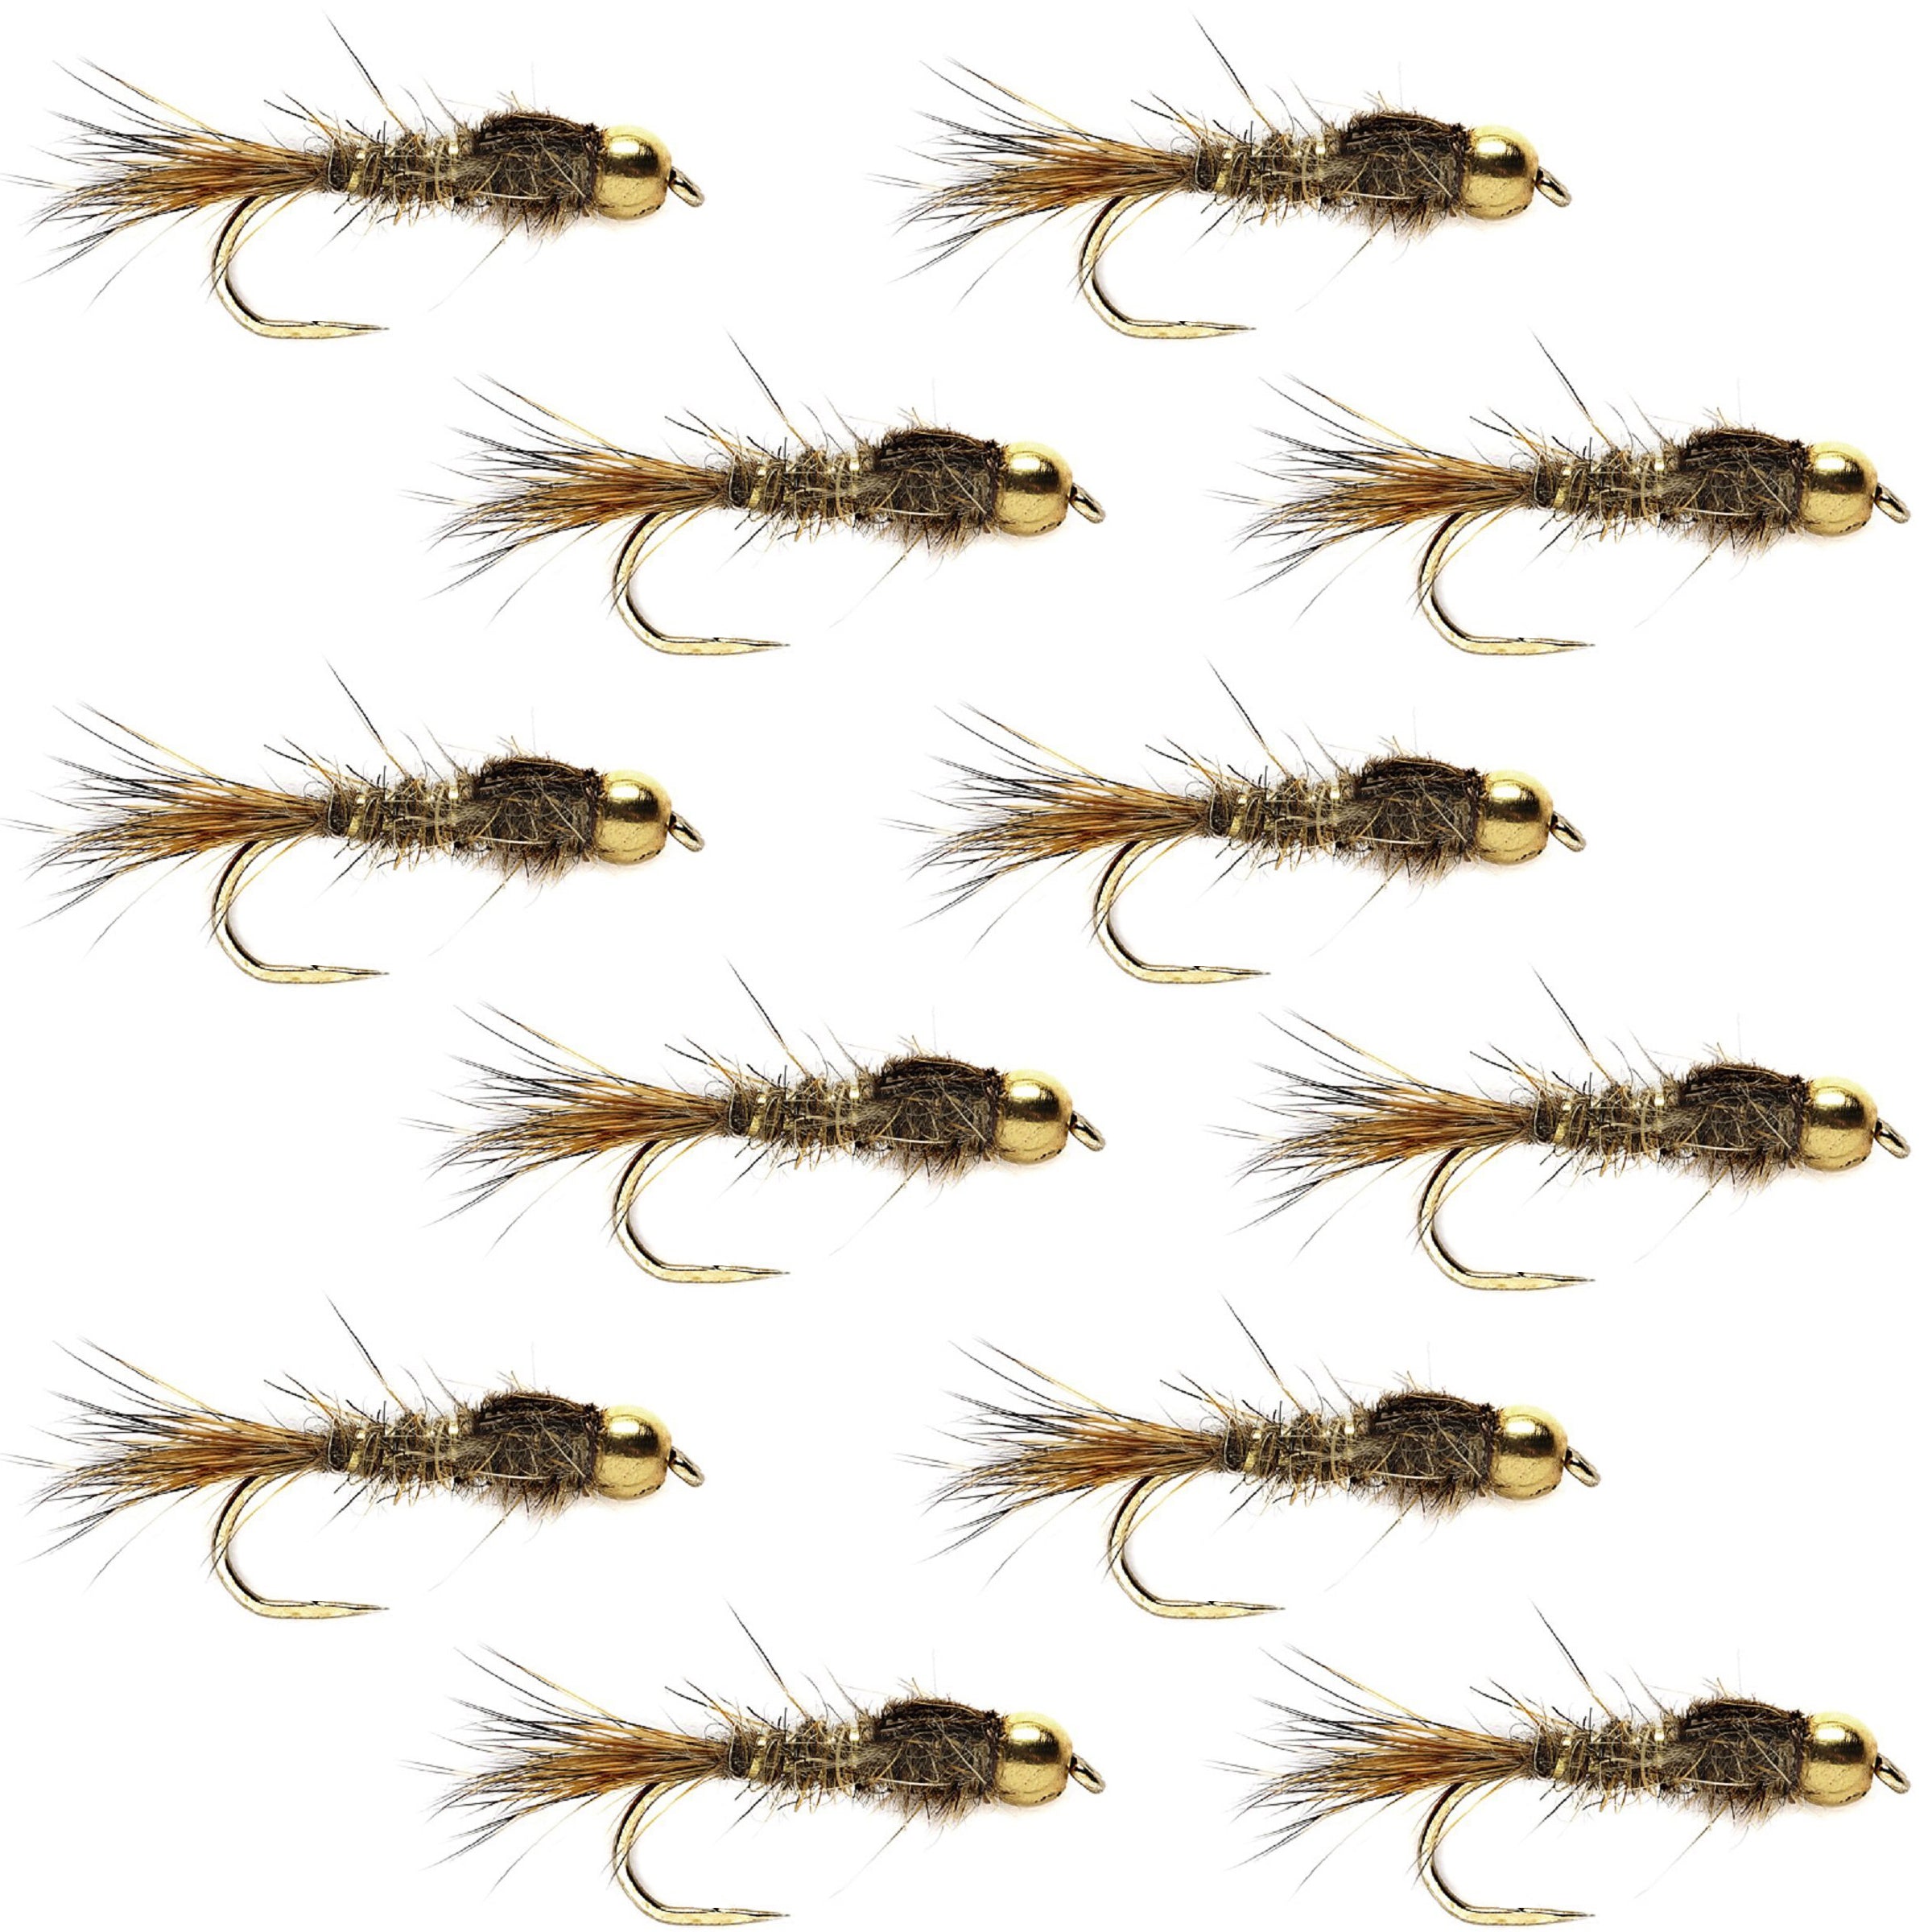 Barbless Bead Head Gold Ribbed Hare's Ear Nymph 1 Dozen Flies Hook Size 16